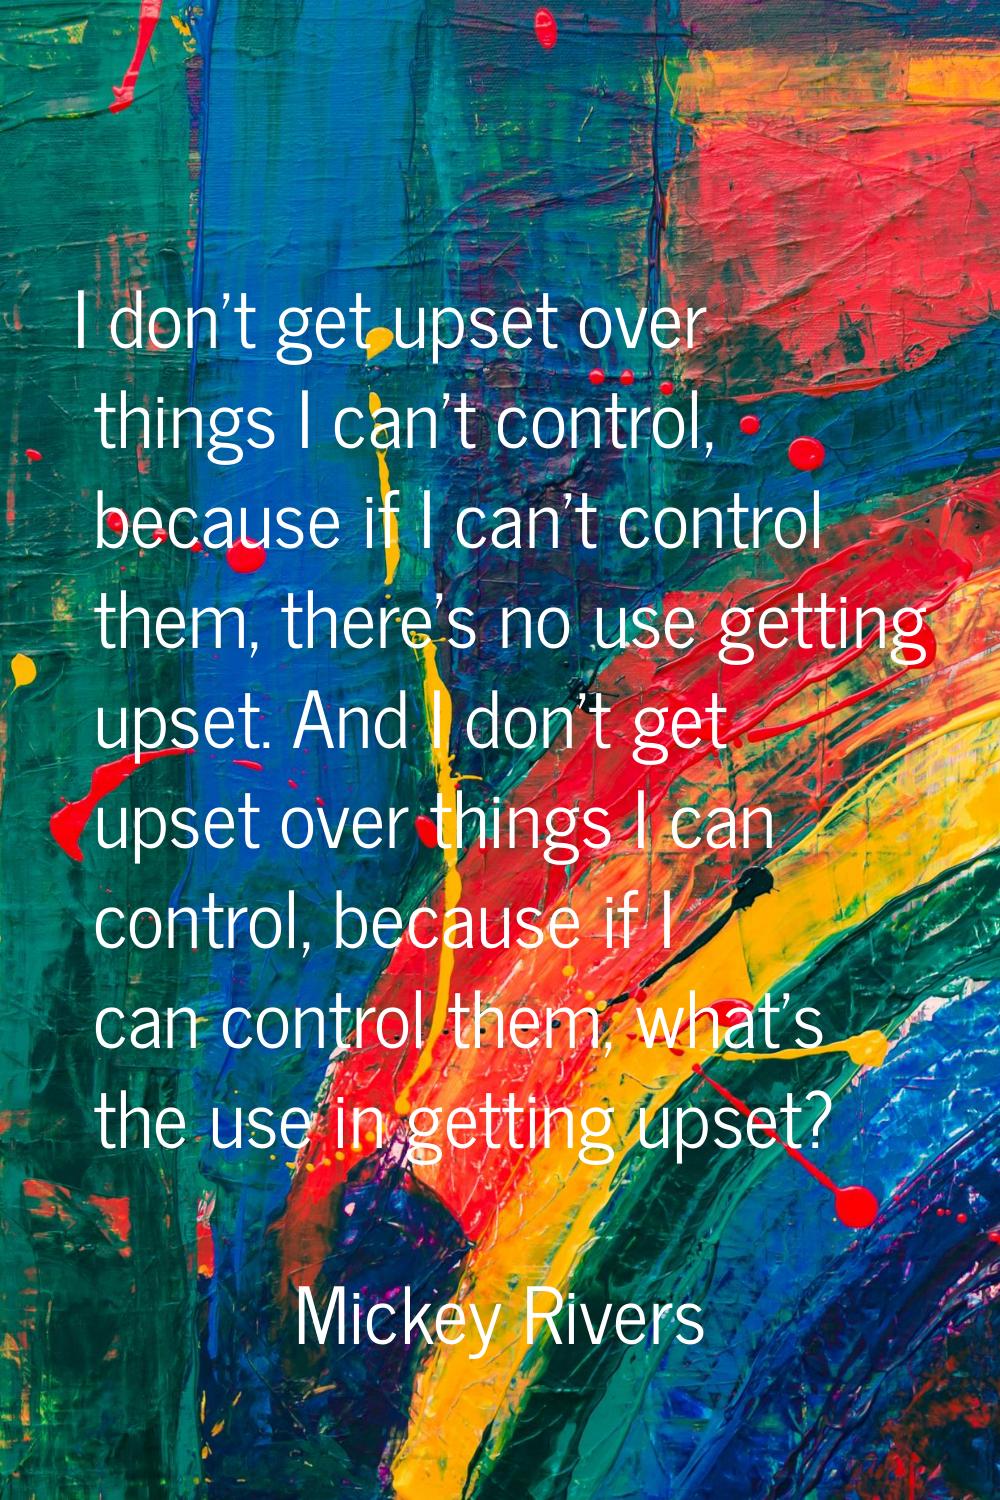 I don't get upset over things I can't control, because if I can't control them, there's no use gett